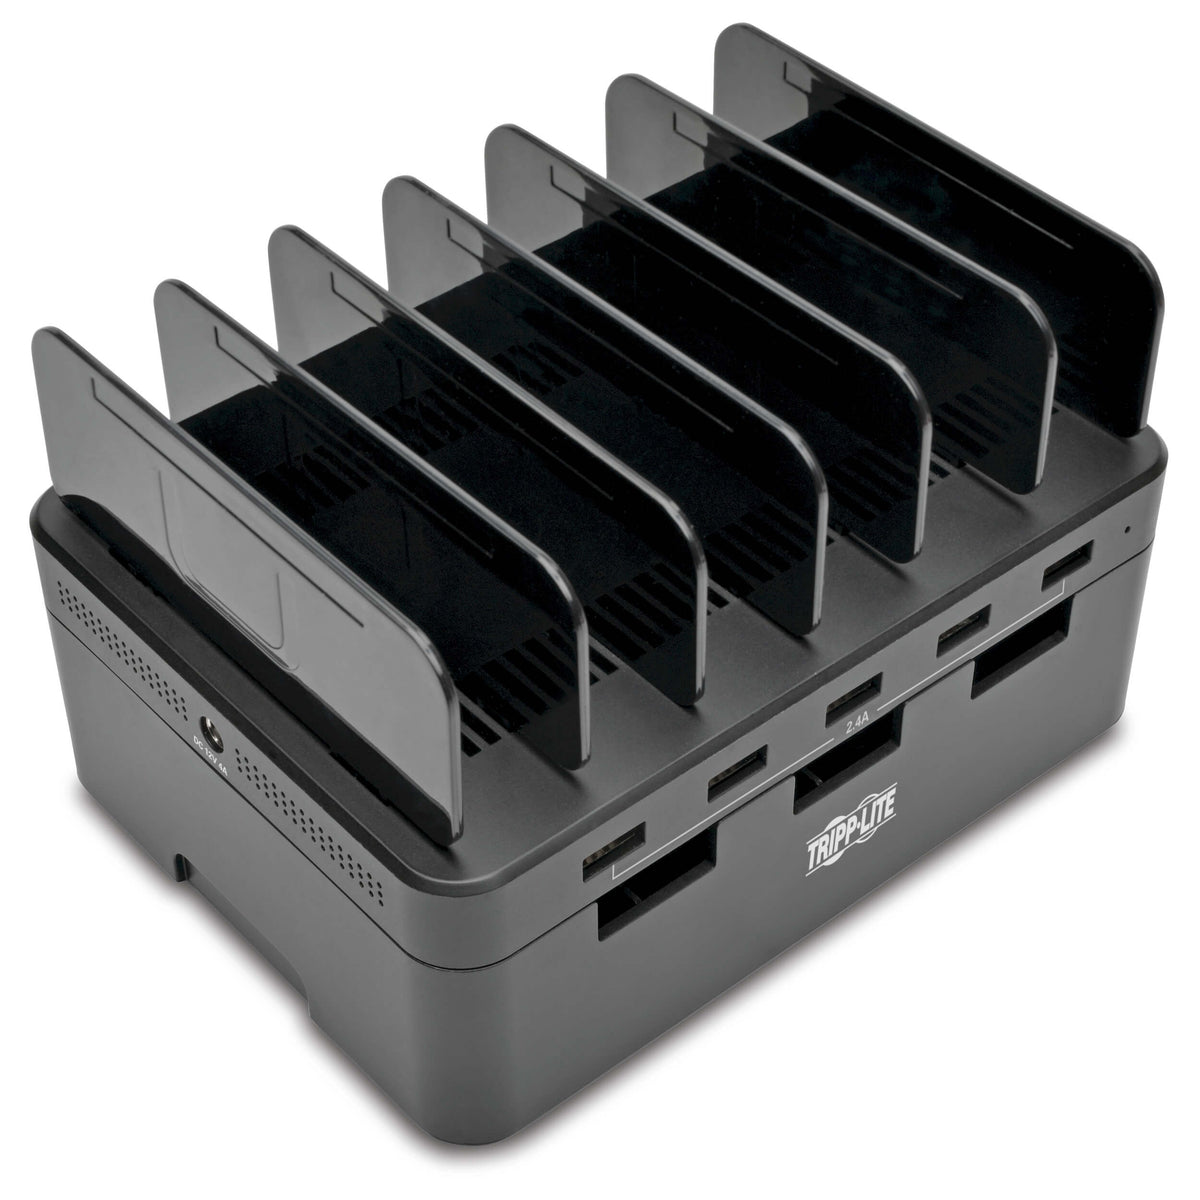 Tripp Lite Charging Station with Built-In Device Storage, 12V (48W) 5 Port USB